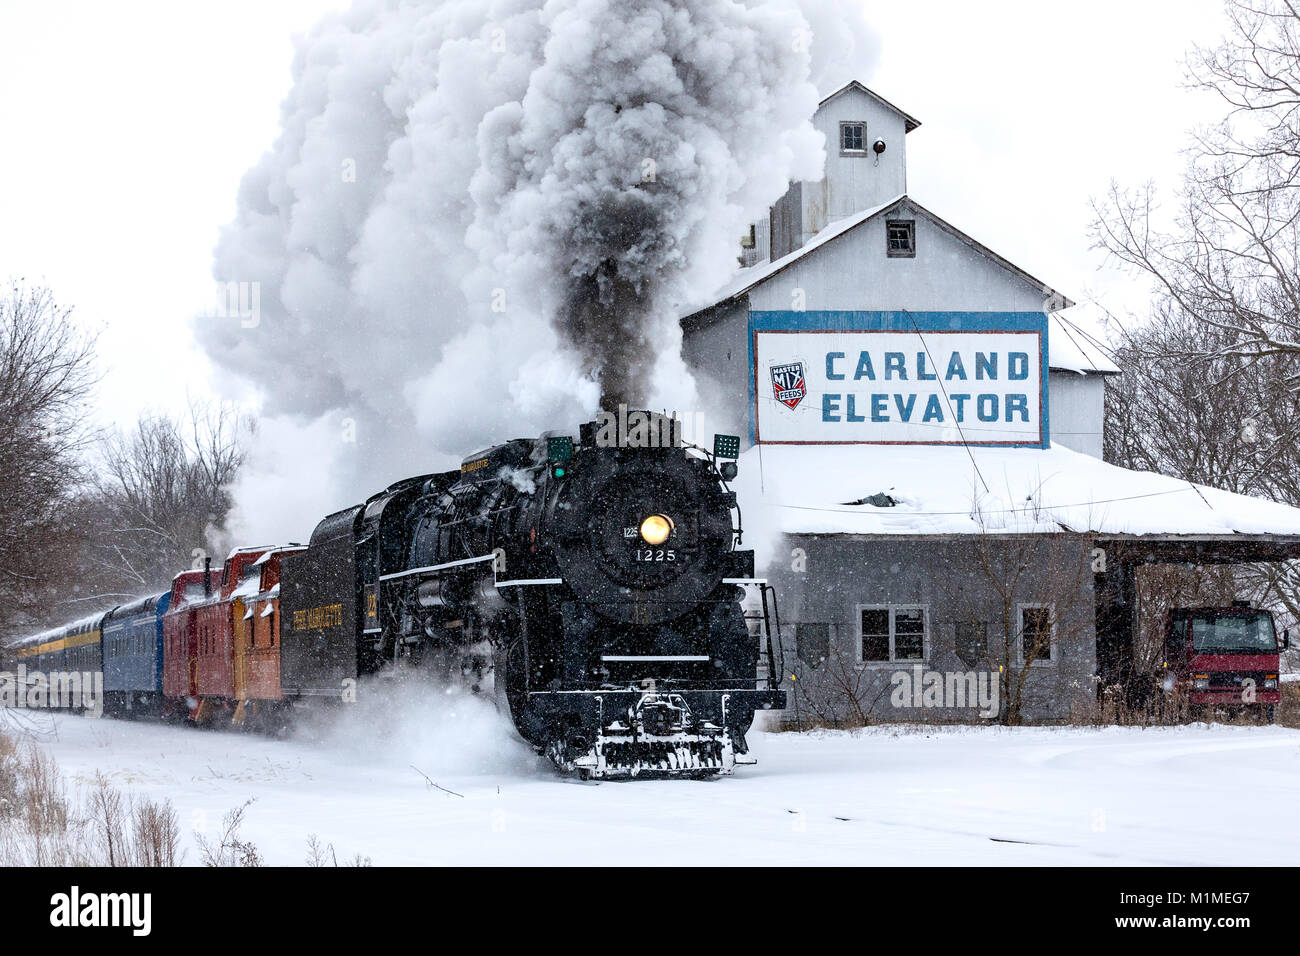 The Pere Marquette 1225 “North Pole Express” passes Carland Elevator, spewing steam on a snowy day Stock Photo